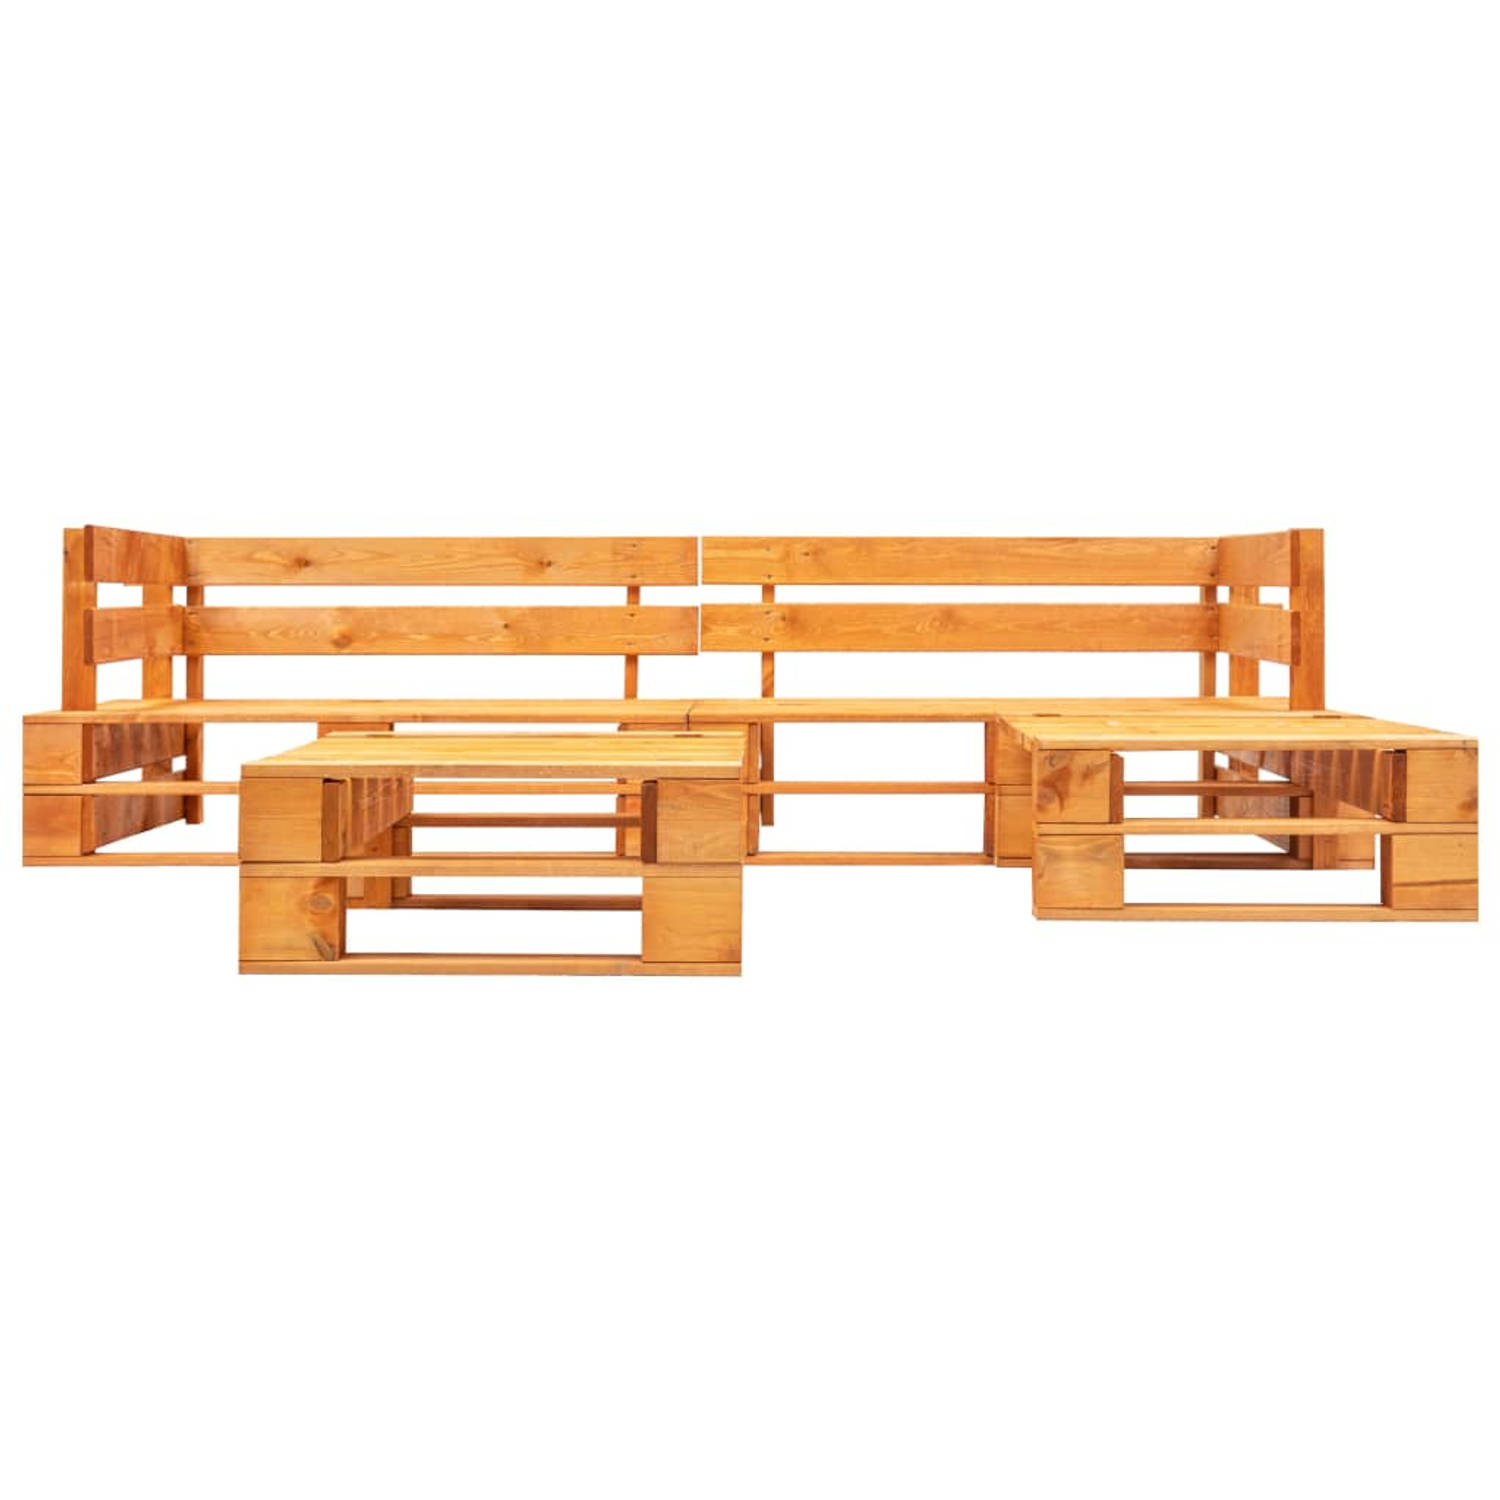 The Living Store 4-delige Loungeset pallet hout honingbruin - Tuinset